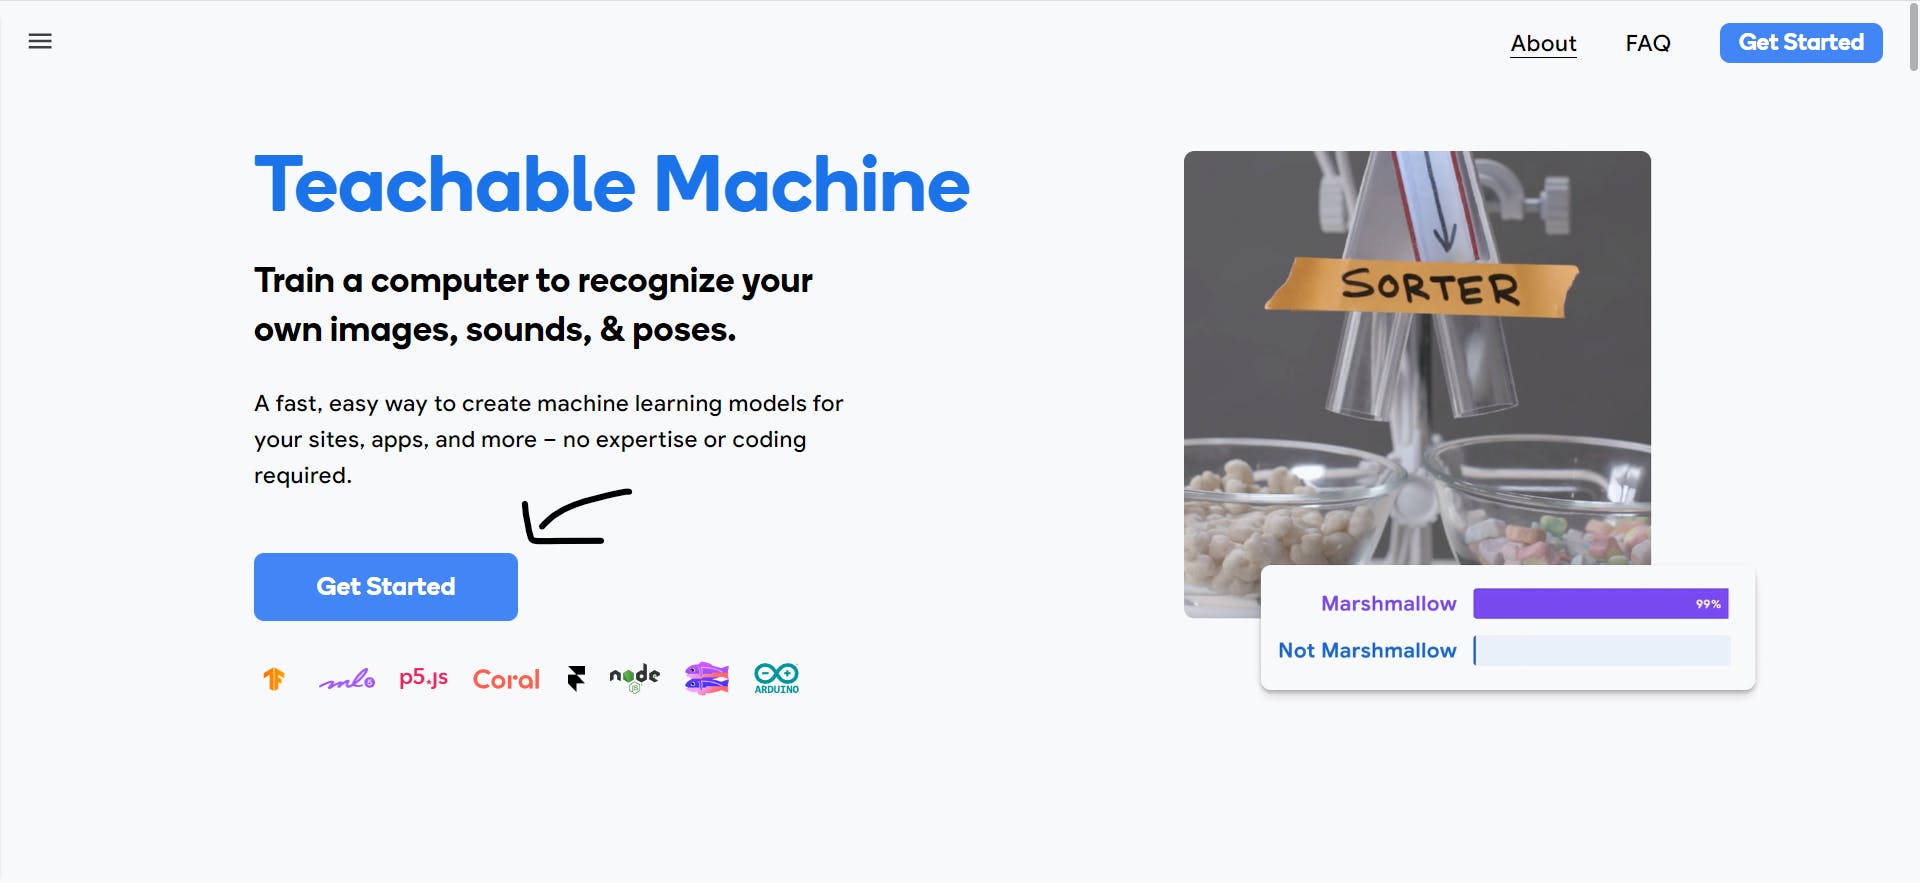 Teachable Machine's website with a arrow next to the "Get started" button